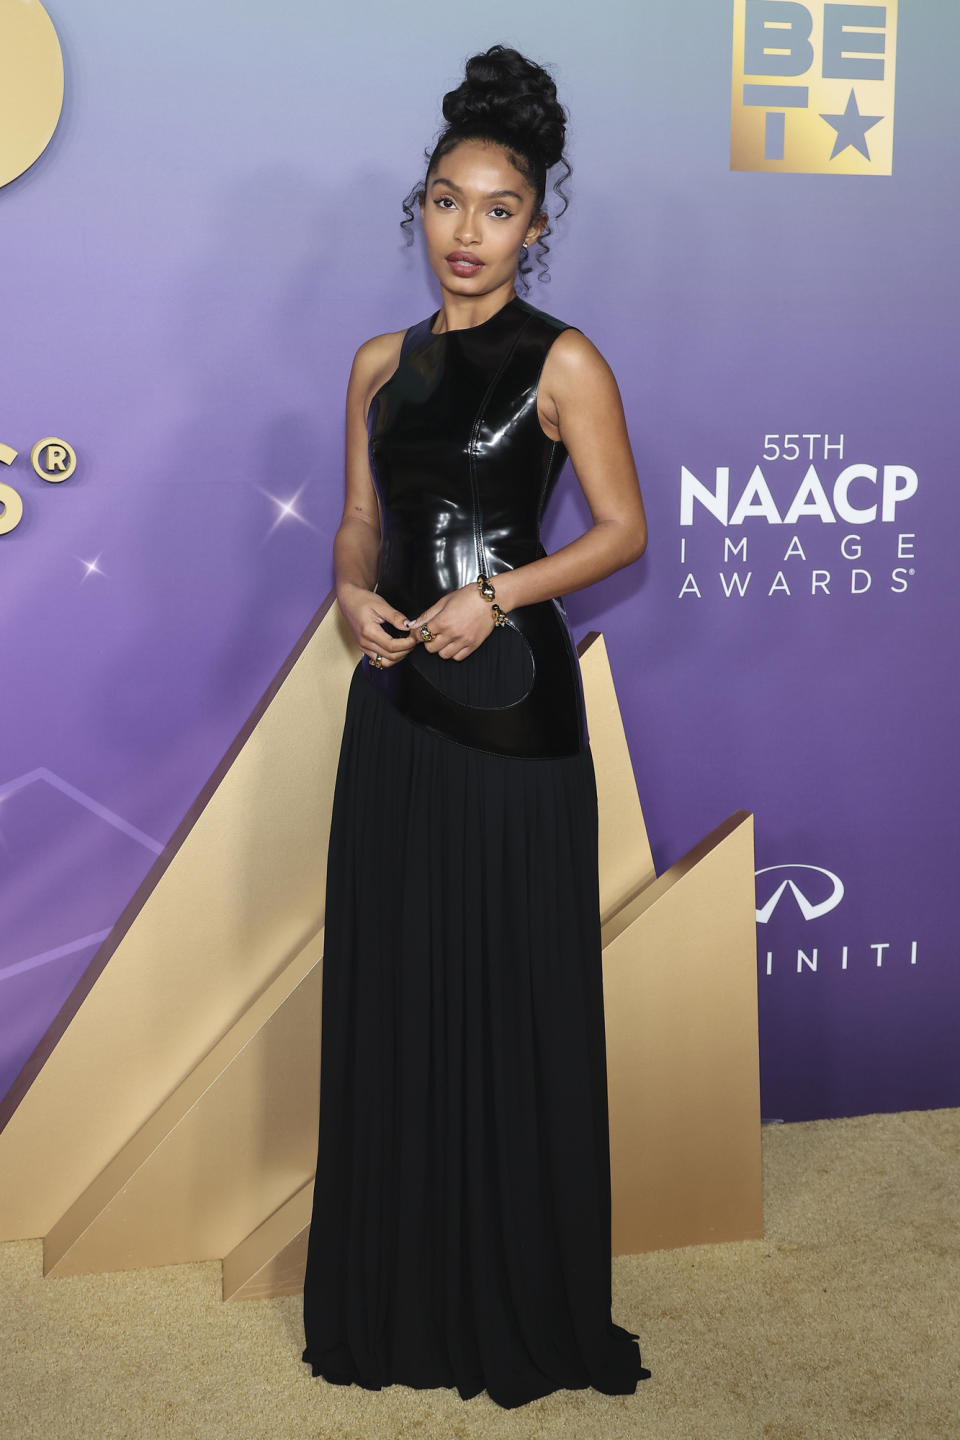 Yara Shahidi at the 55th NAACP Image Awards held at The Shrine Auditorium on March 16, 2024 in Los Angeles, California.